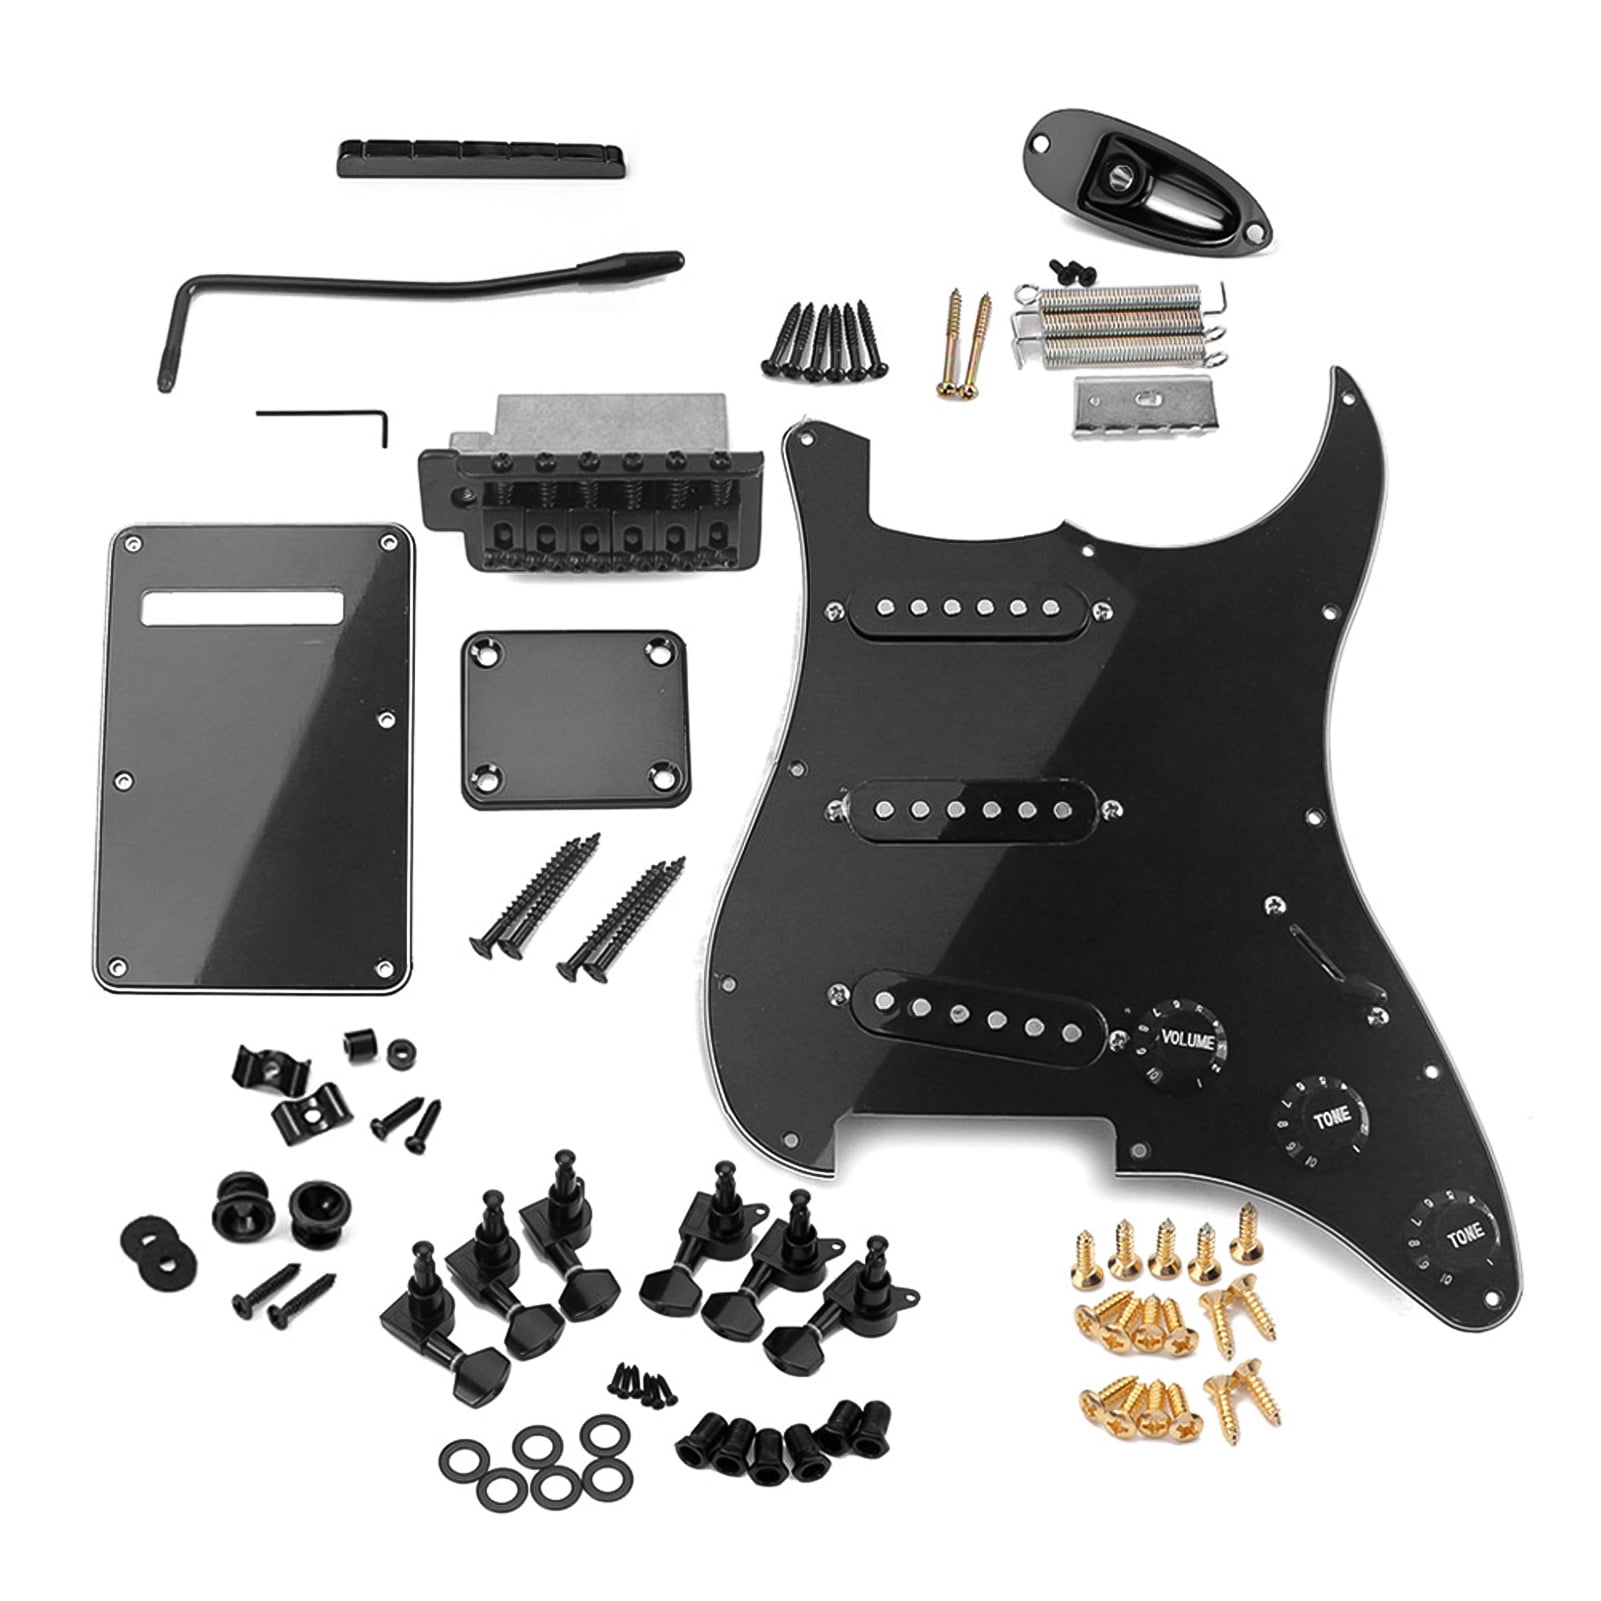 Electric DIY Set ST Style, Full Accessory Kit Build Your Own Guitar